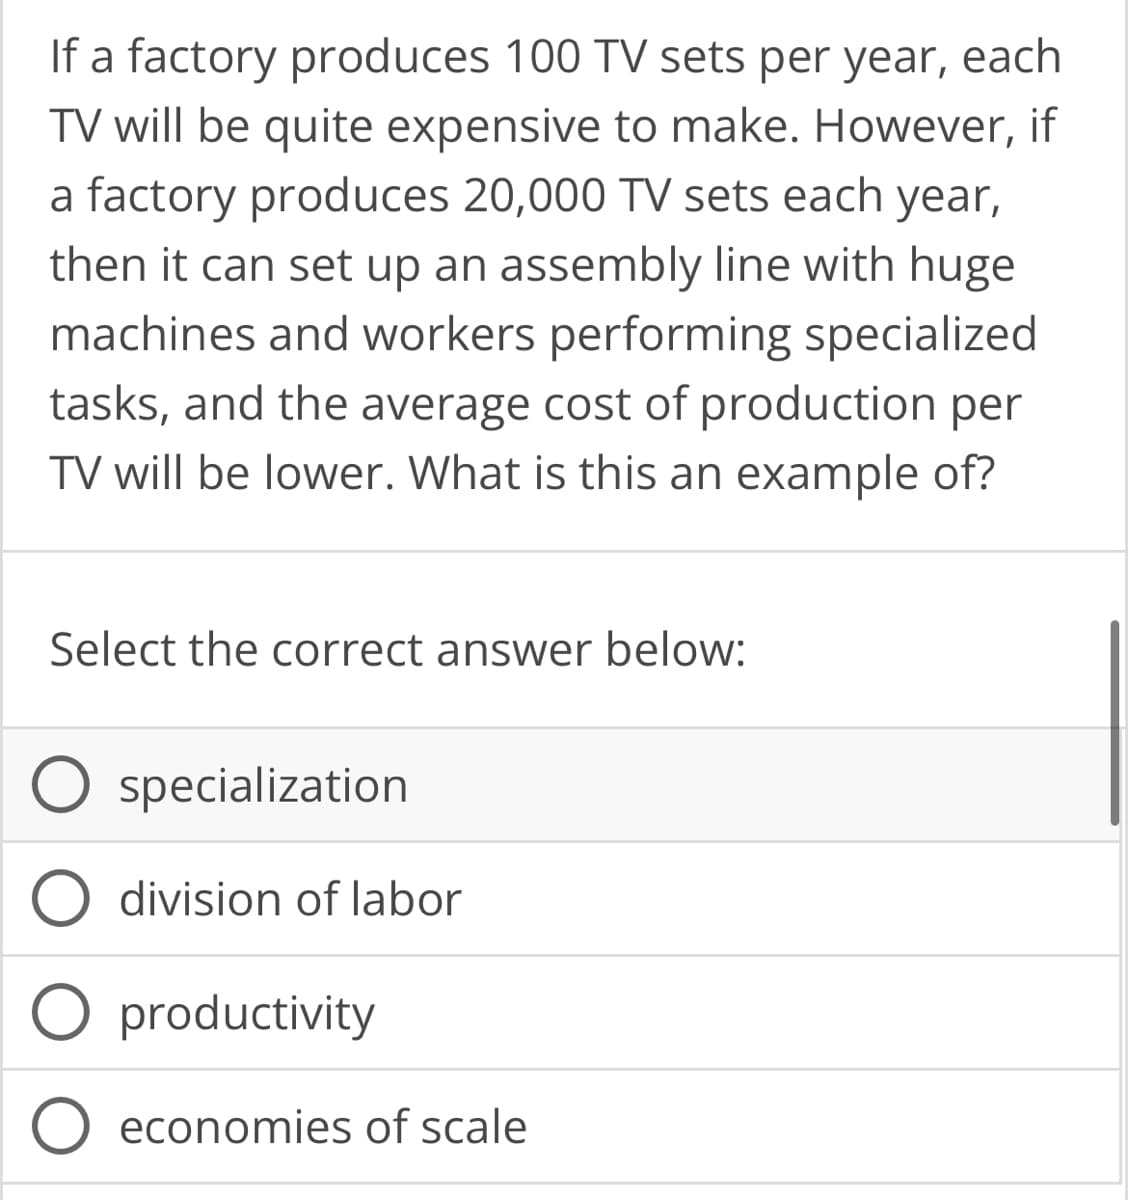 If a factory produces 100 TV sets per year, each
TV will be quite expensive to make. However, if
a factory produces 20,000 TV sets each year,
then it can set up an assembly line with huge
machines and workers performing specialized
tasks, and the average cost of production per
TV will be lower. What is this an example of?
Select the correct answer below:
O specialization
division of labor
O productivity
O economies of scale